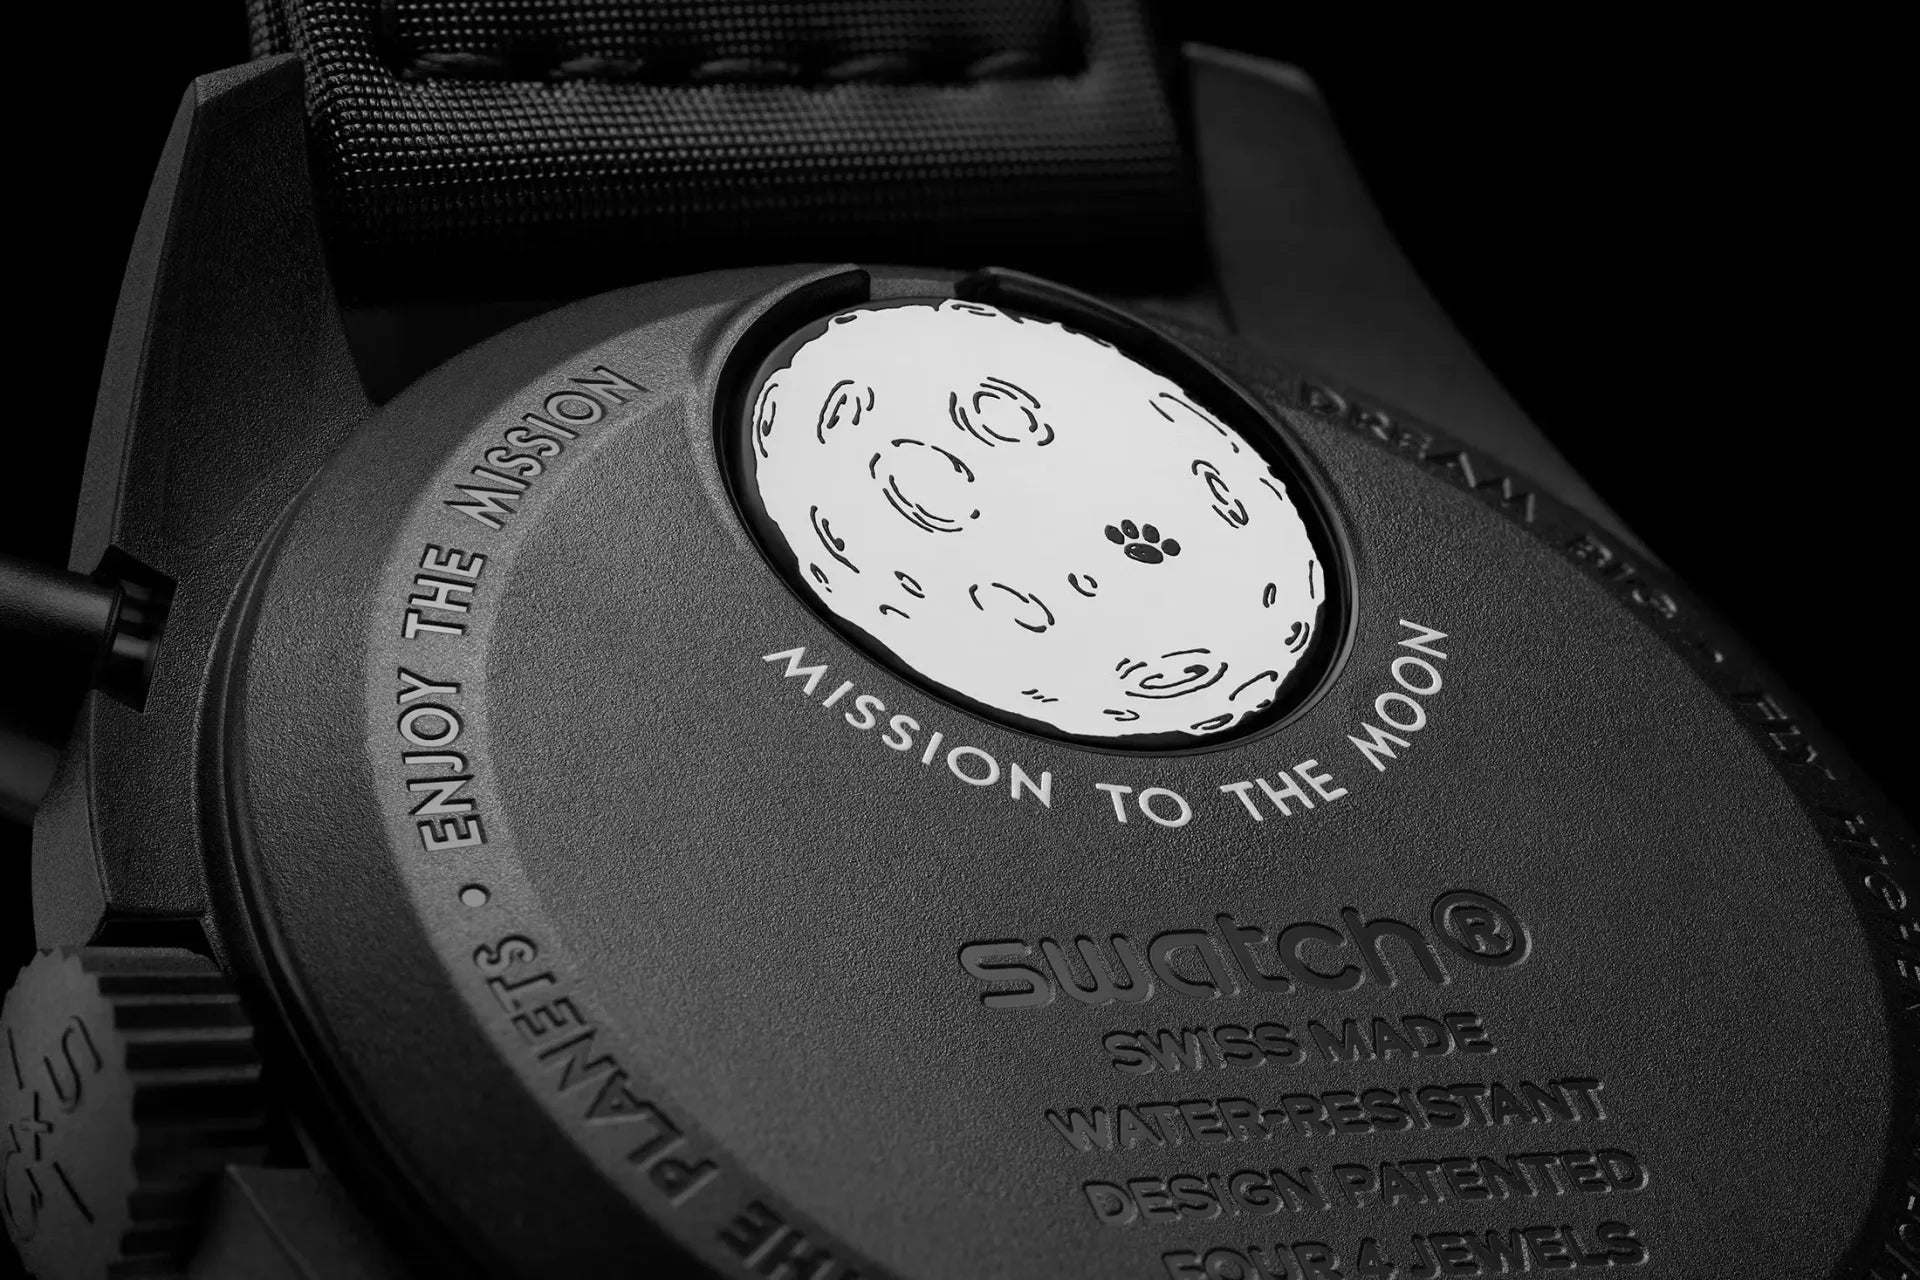 Swatch x Omega x Snoopy Black - Mission to the Moonphase - New 